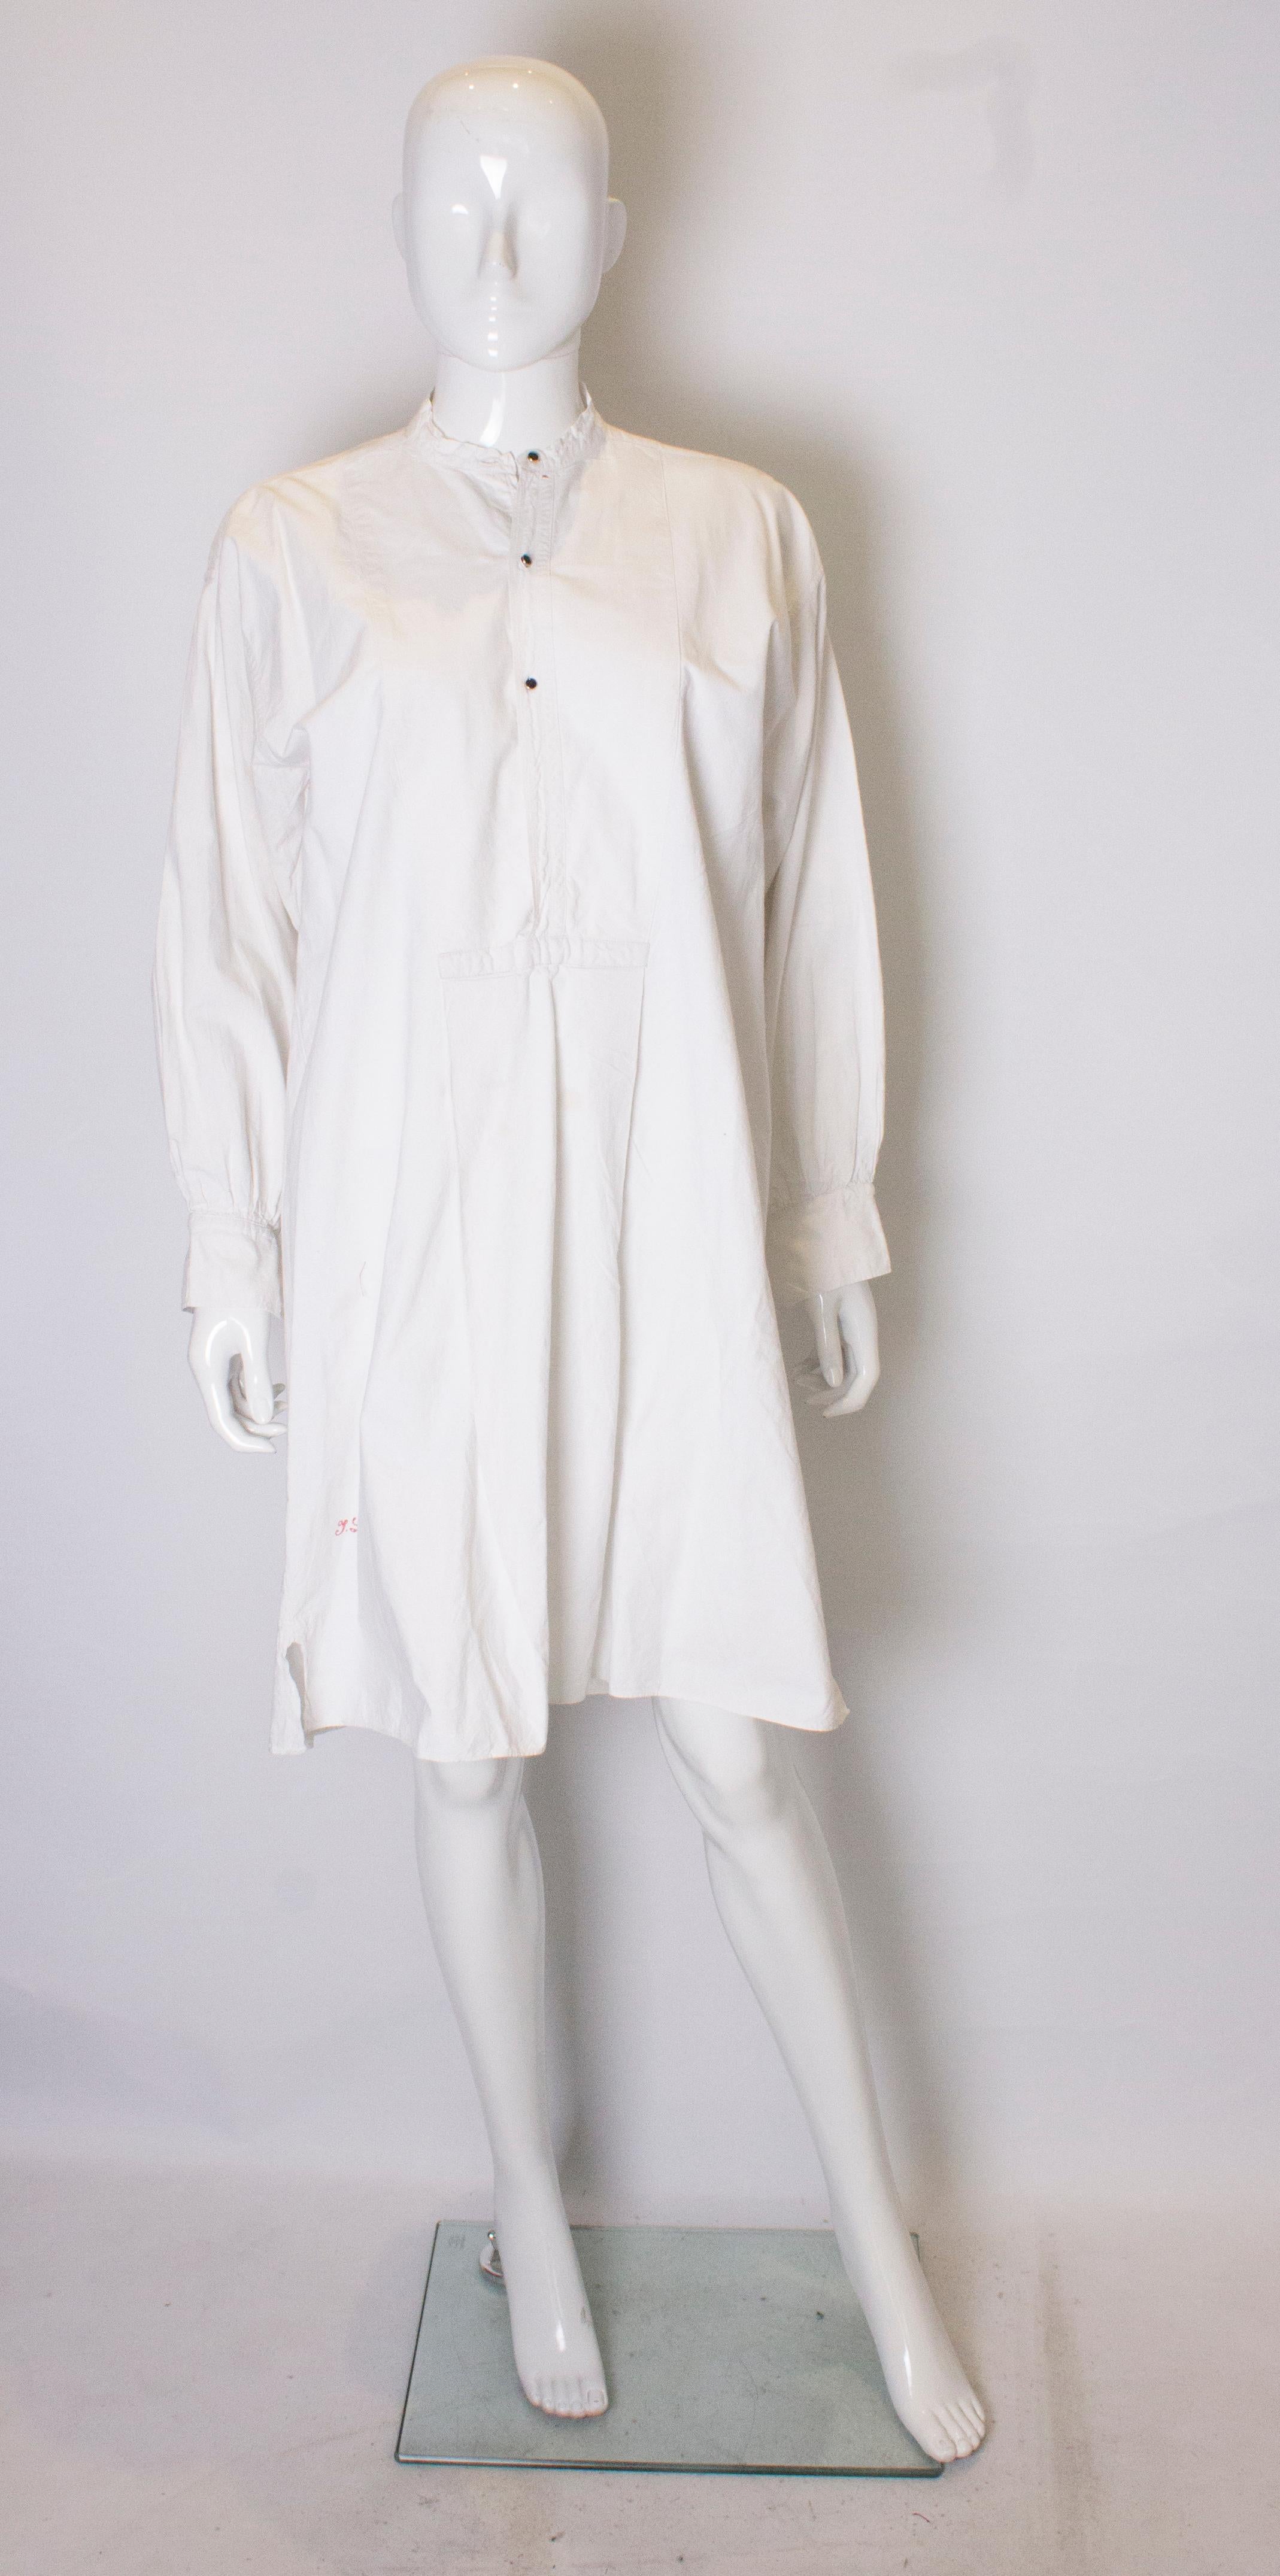 A lovely vintage heavweight cotton shirt dress. The dress has a stand up collar, single button cuffs and  a 4'' slit on either side.